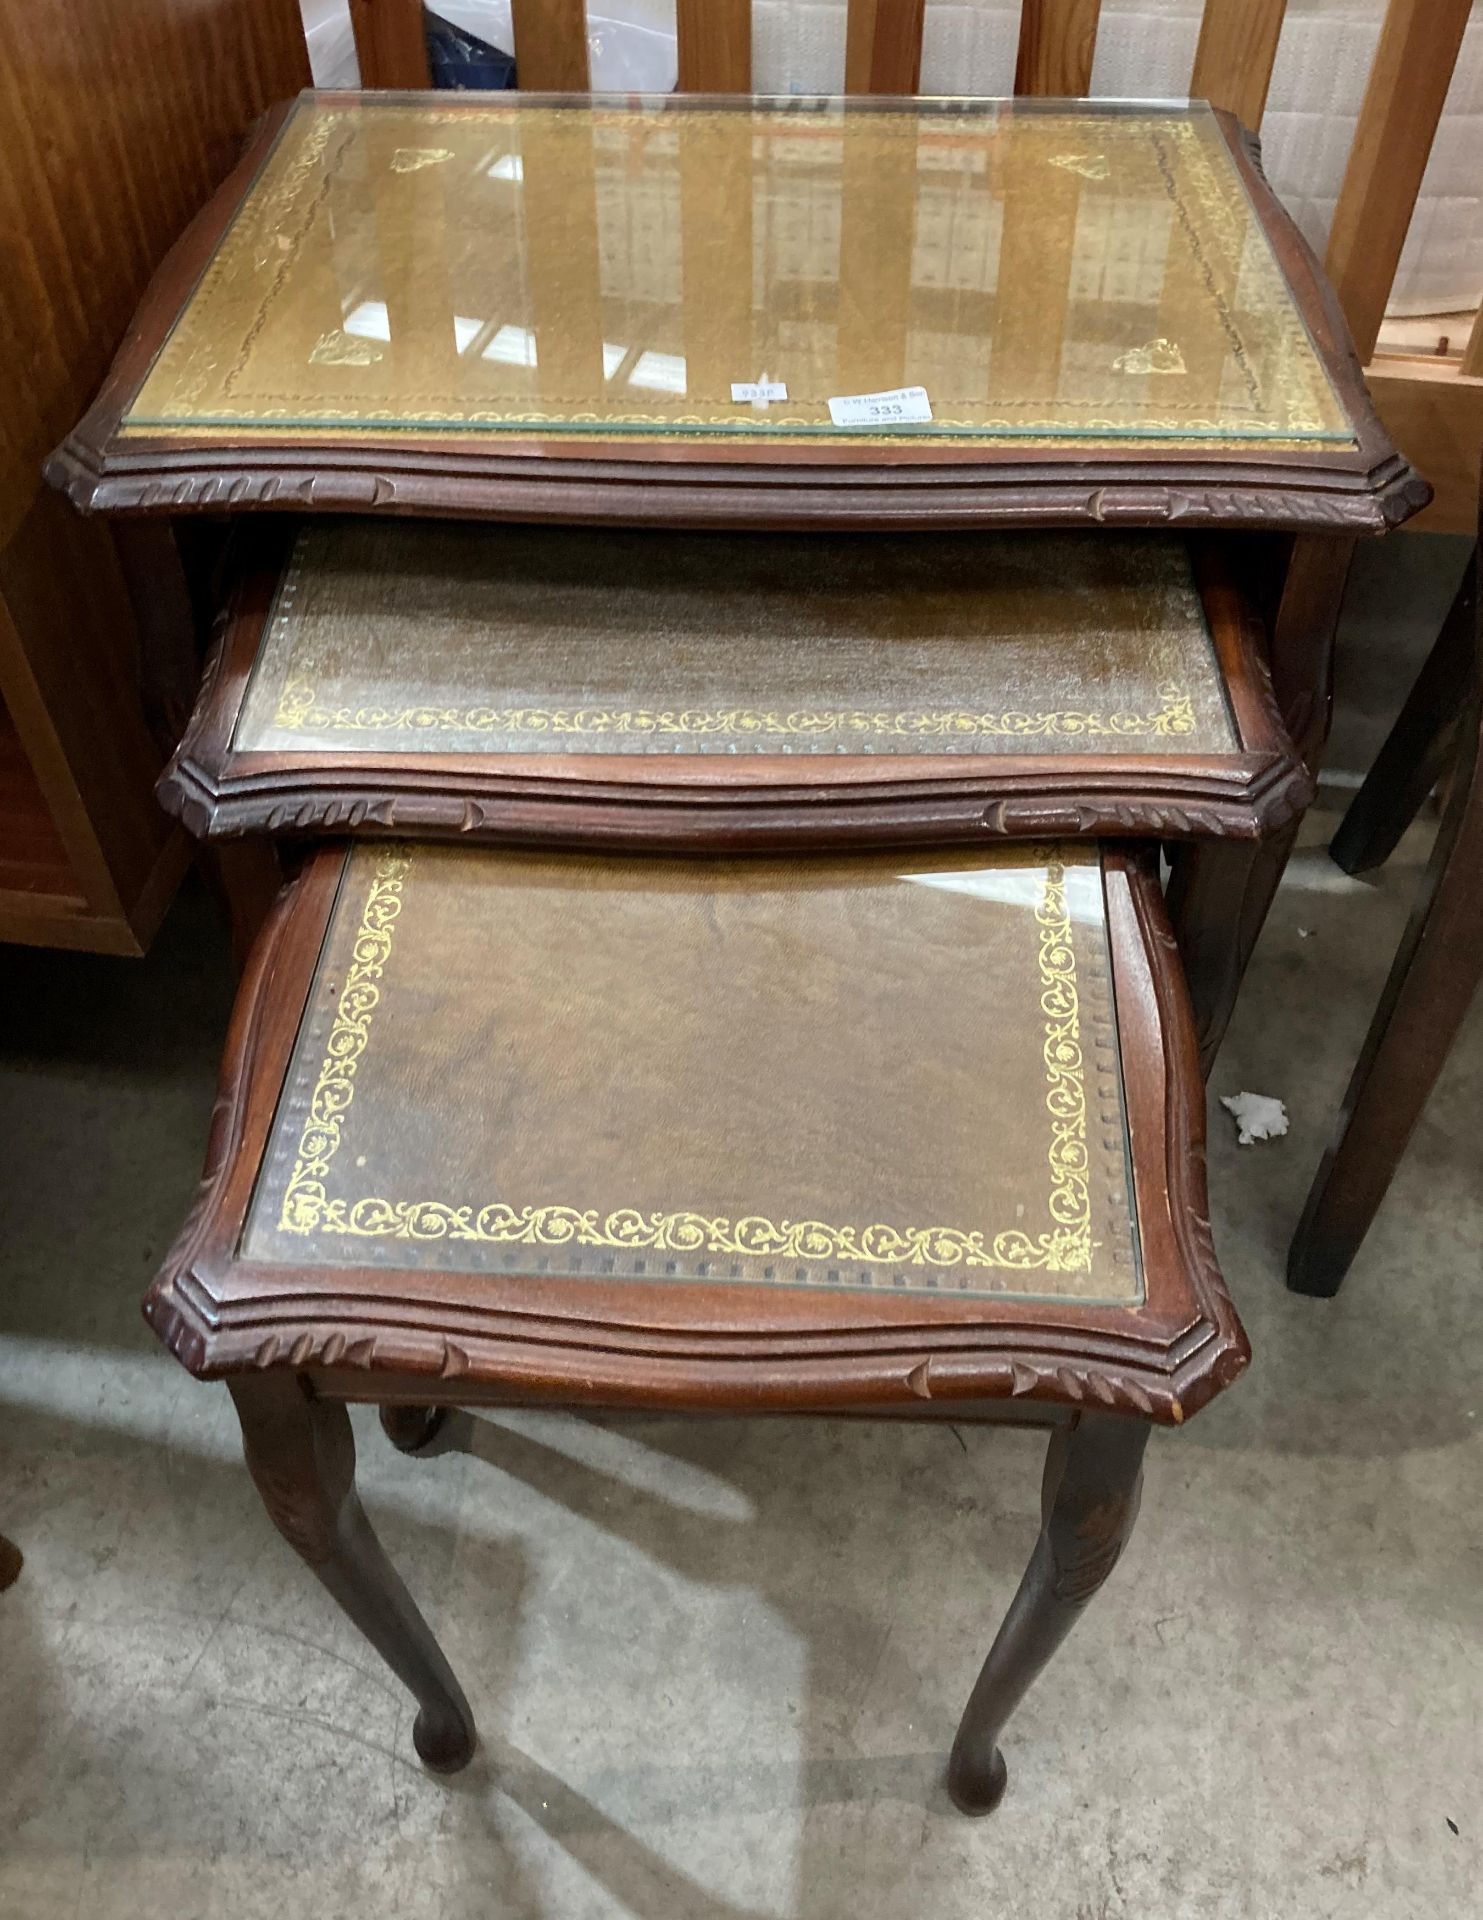 A mahogany finish nest of three coffee tables with brown tooled leather finish tops and glass